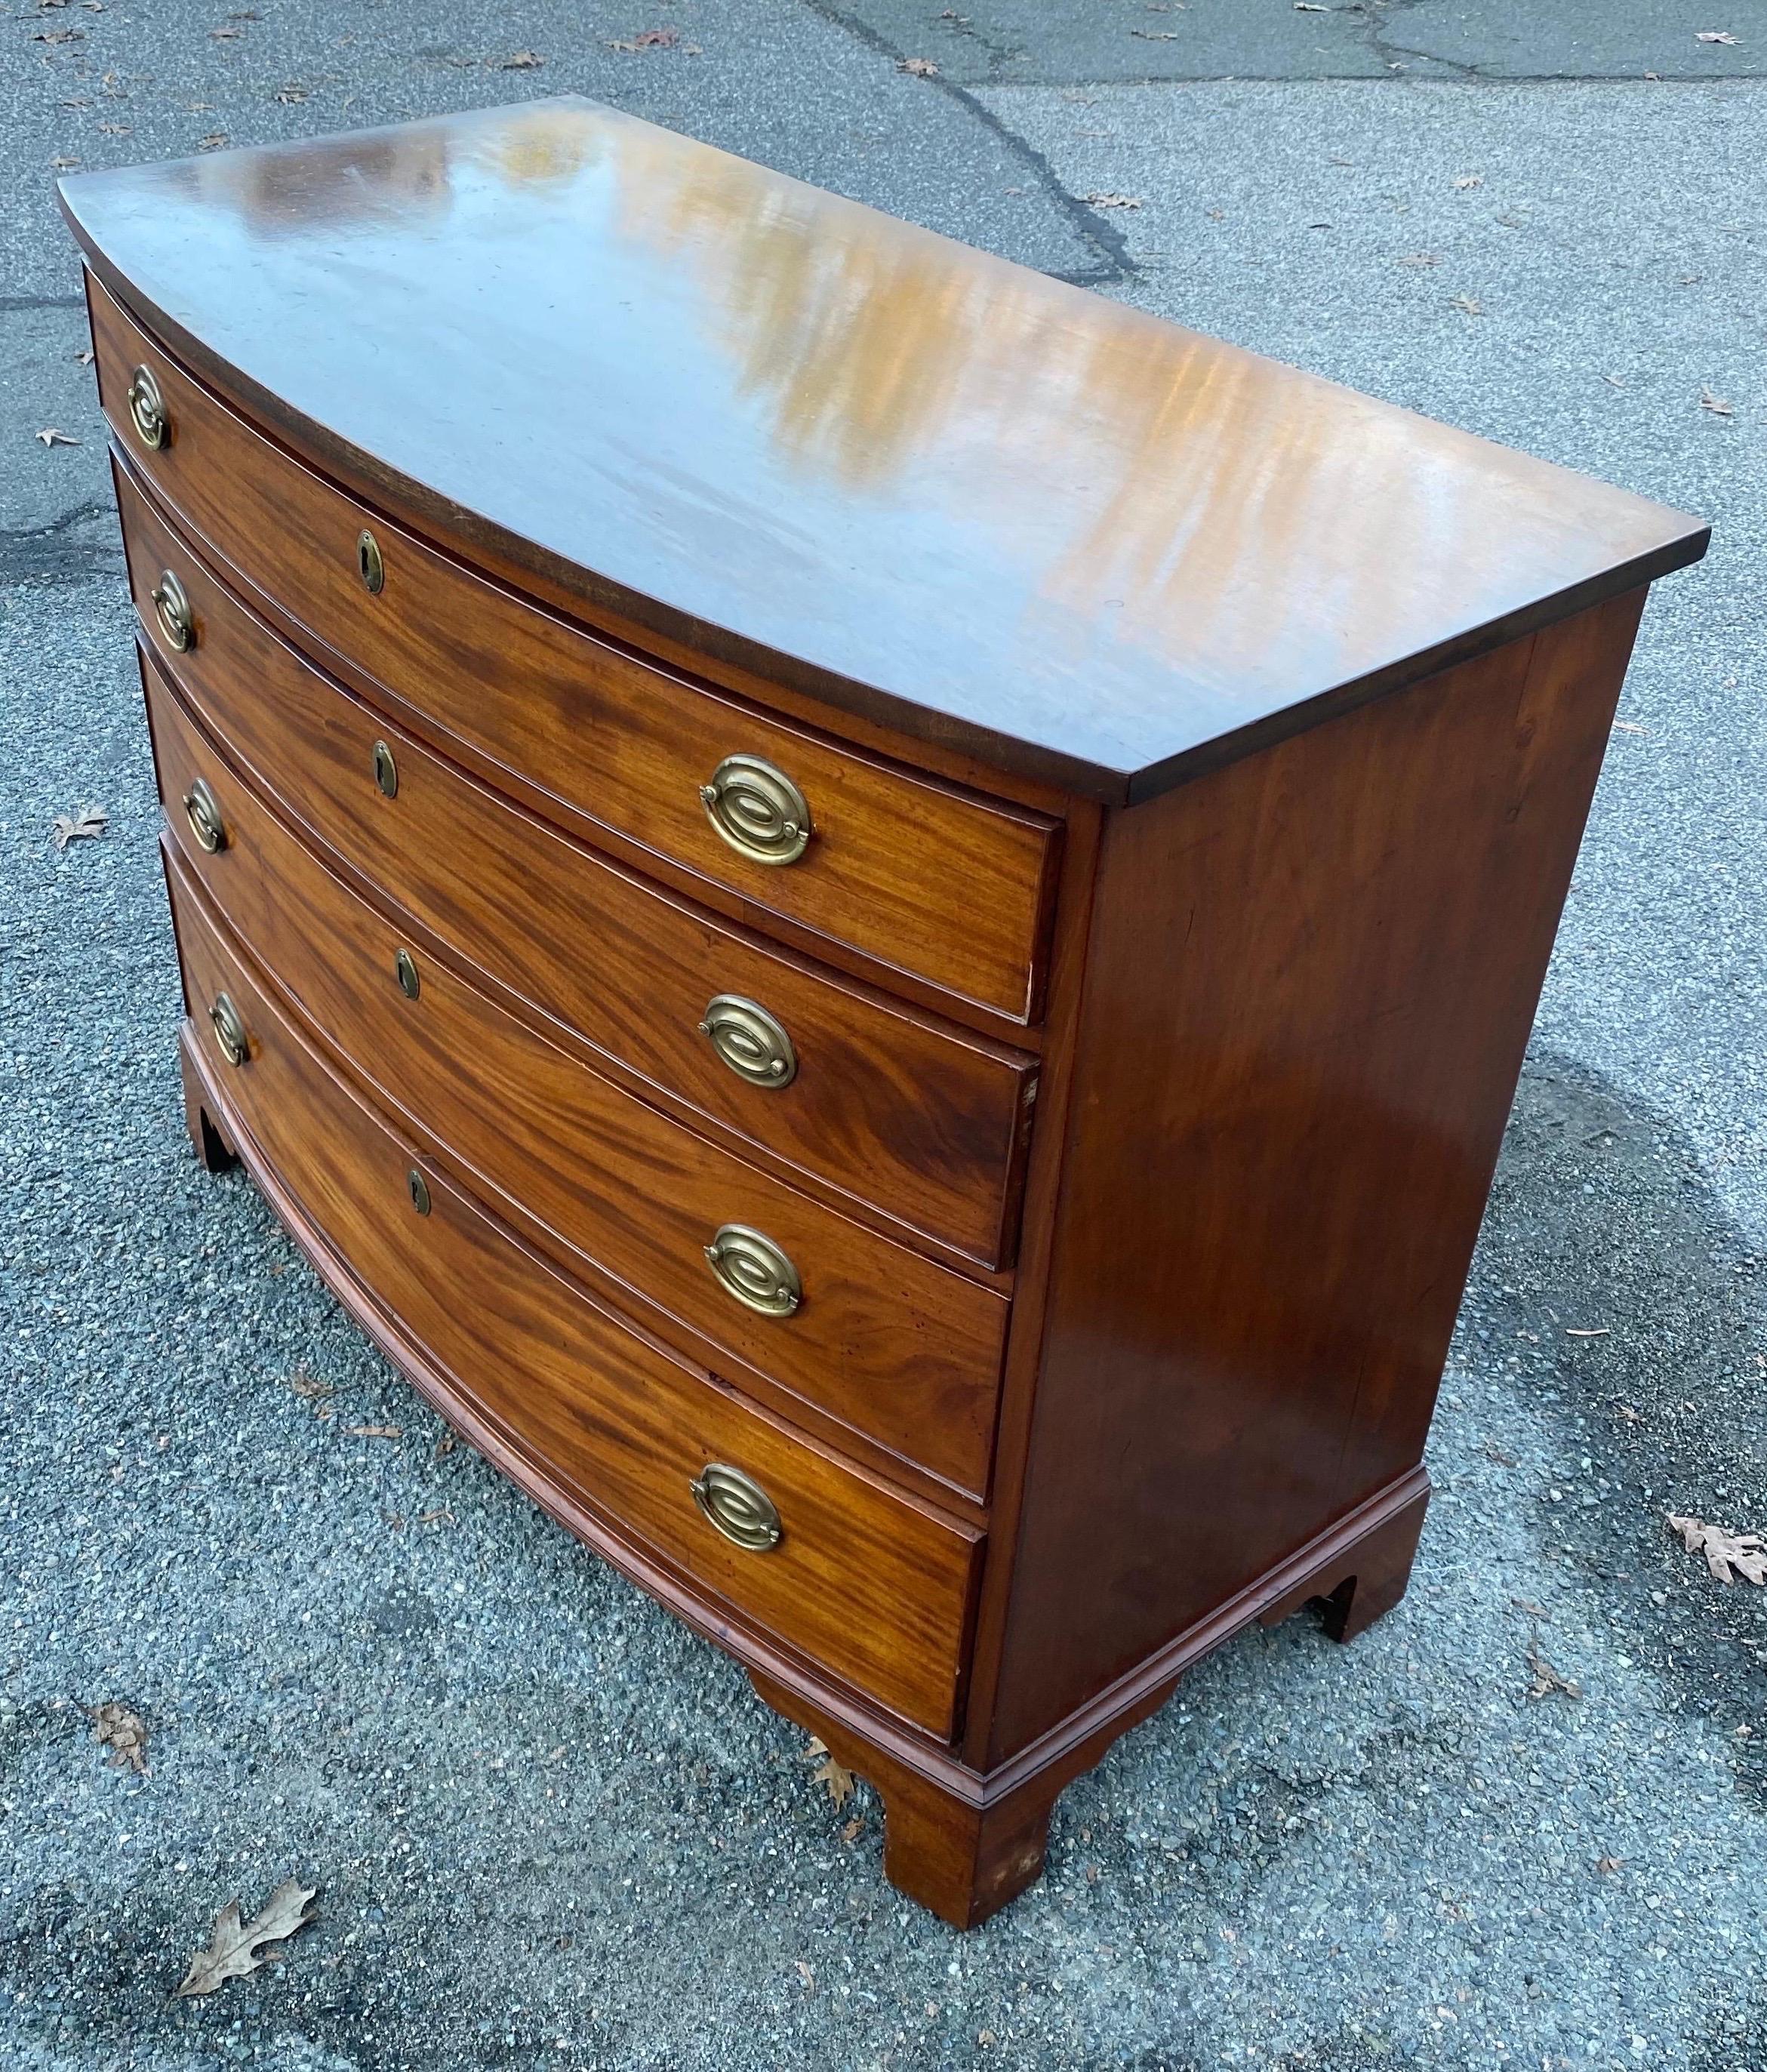 19th Century English 4-Drawer Bowfront Chest of Drawers with Figured Mahogany For Sale 3